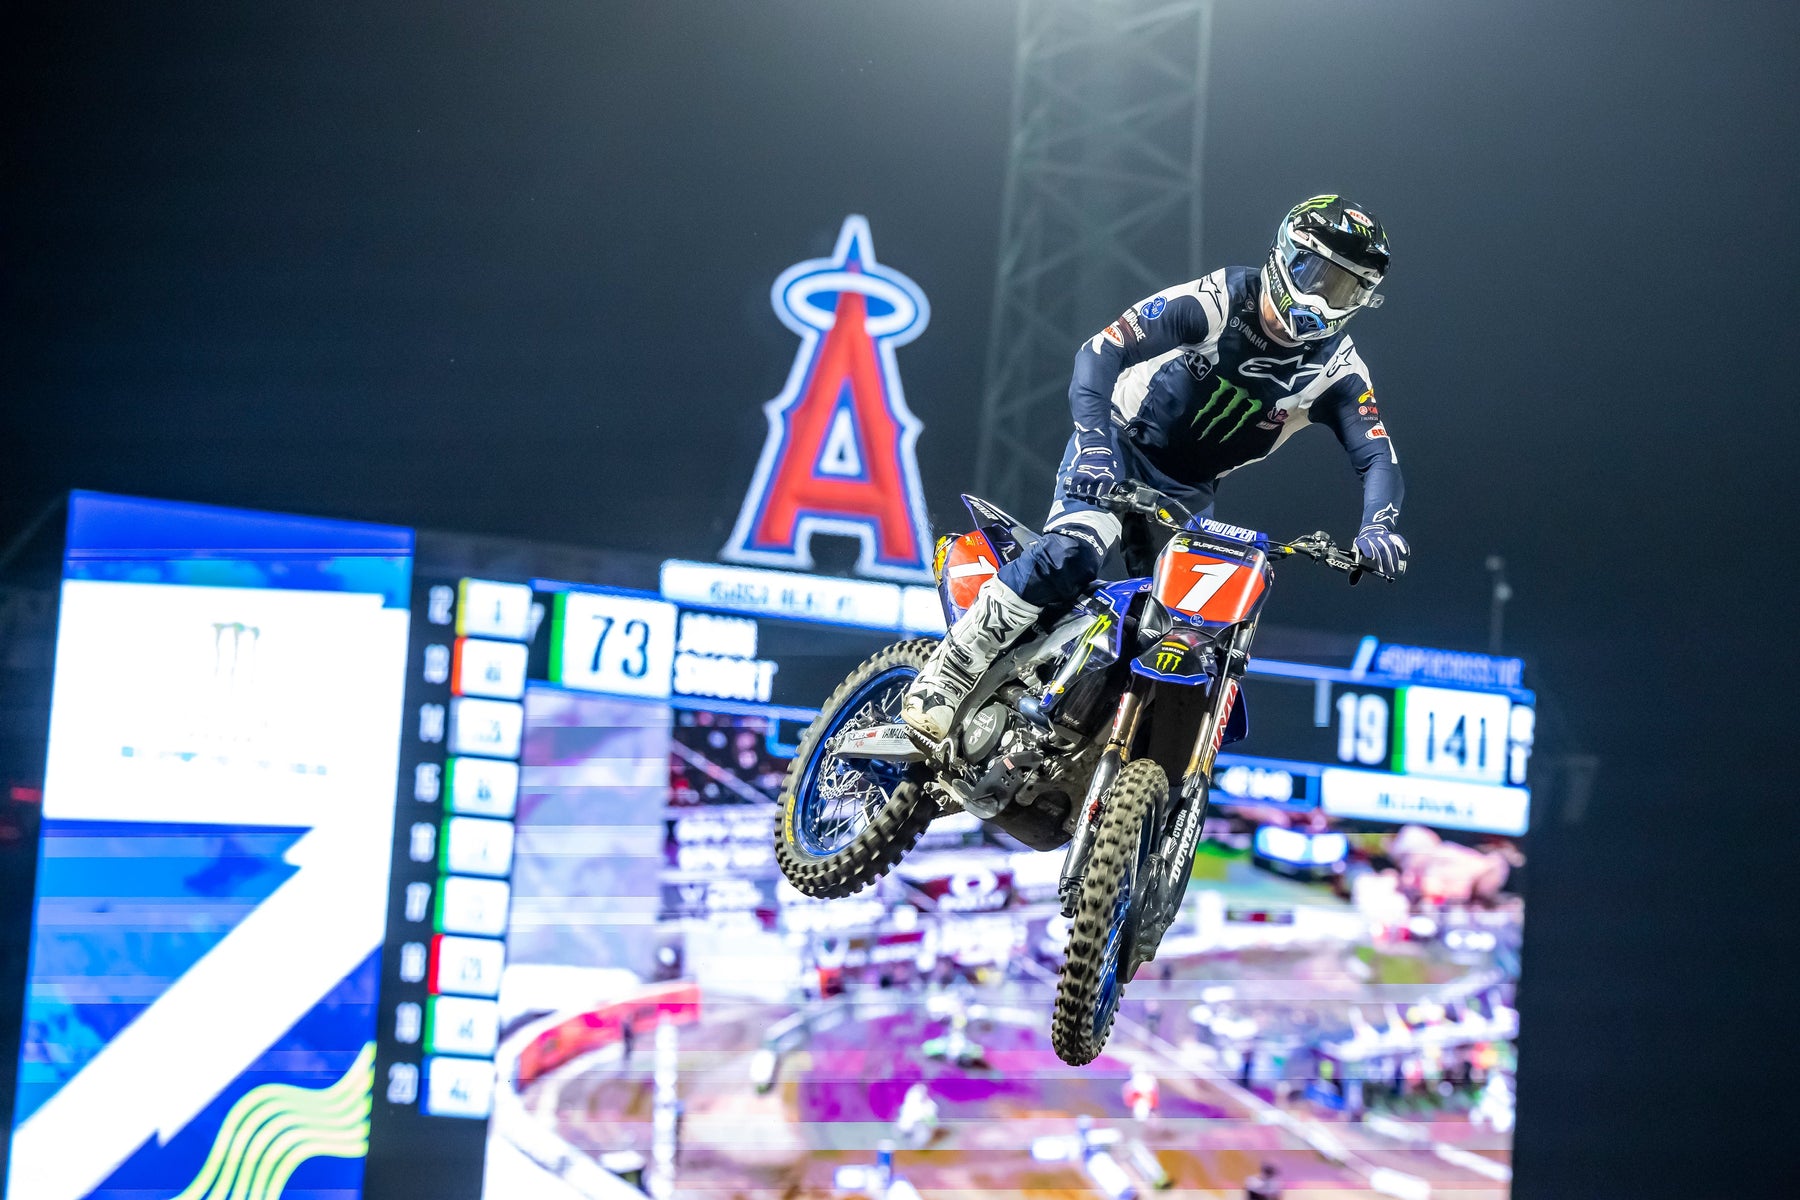 ALPINESTARS PODIUM LOCK-OUT AS HIGH-FLYING ELI TOMAC SOARS TO 450SX VICTORY AT ANAHEIM 1 IN DRAMA-PACKED SEASON OPENER IN CALIFORNIA